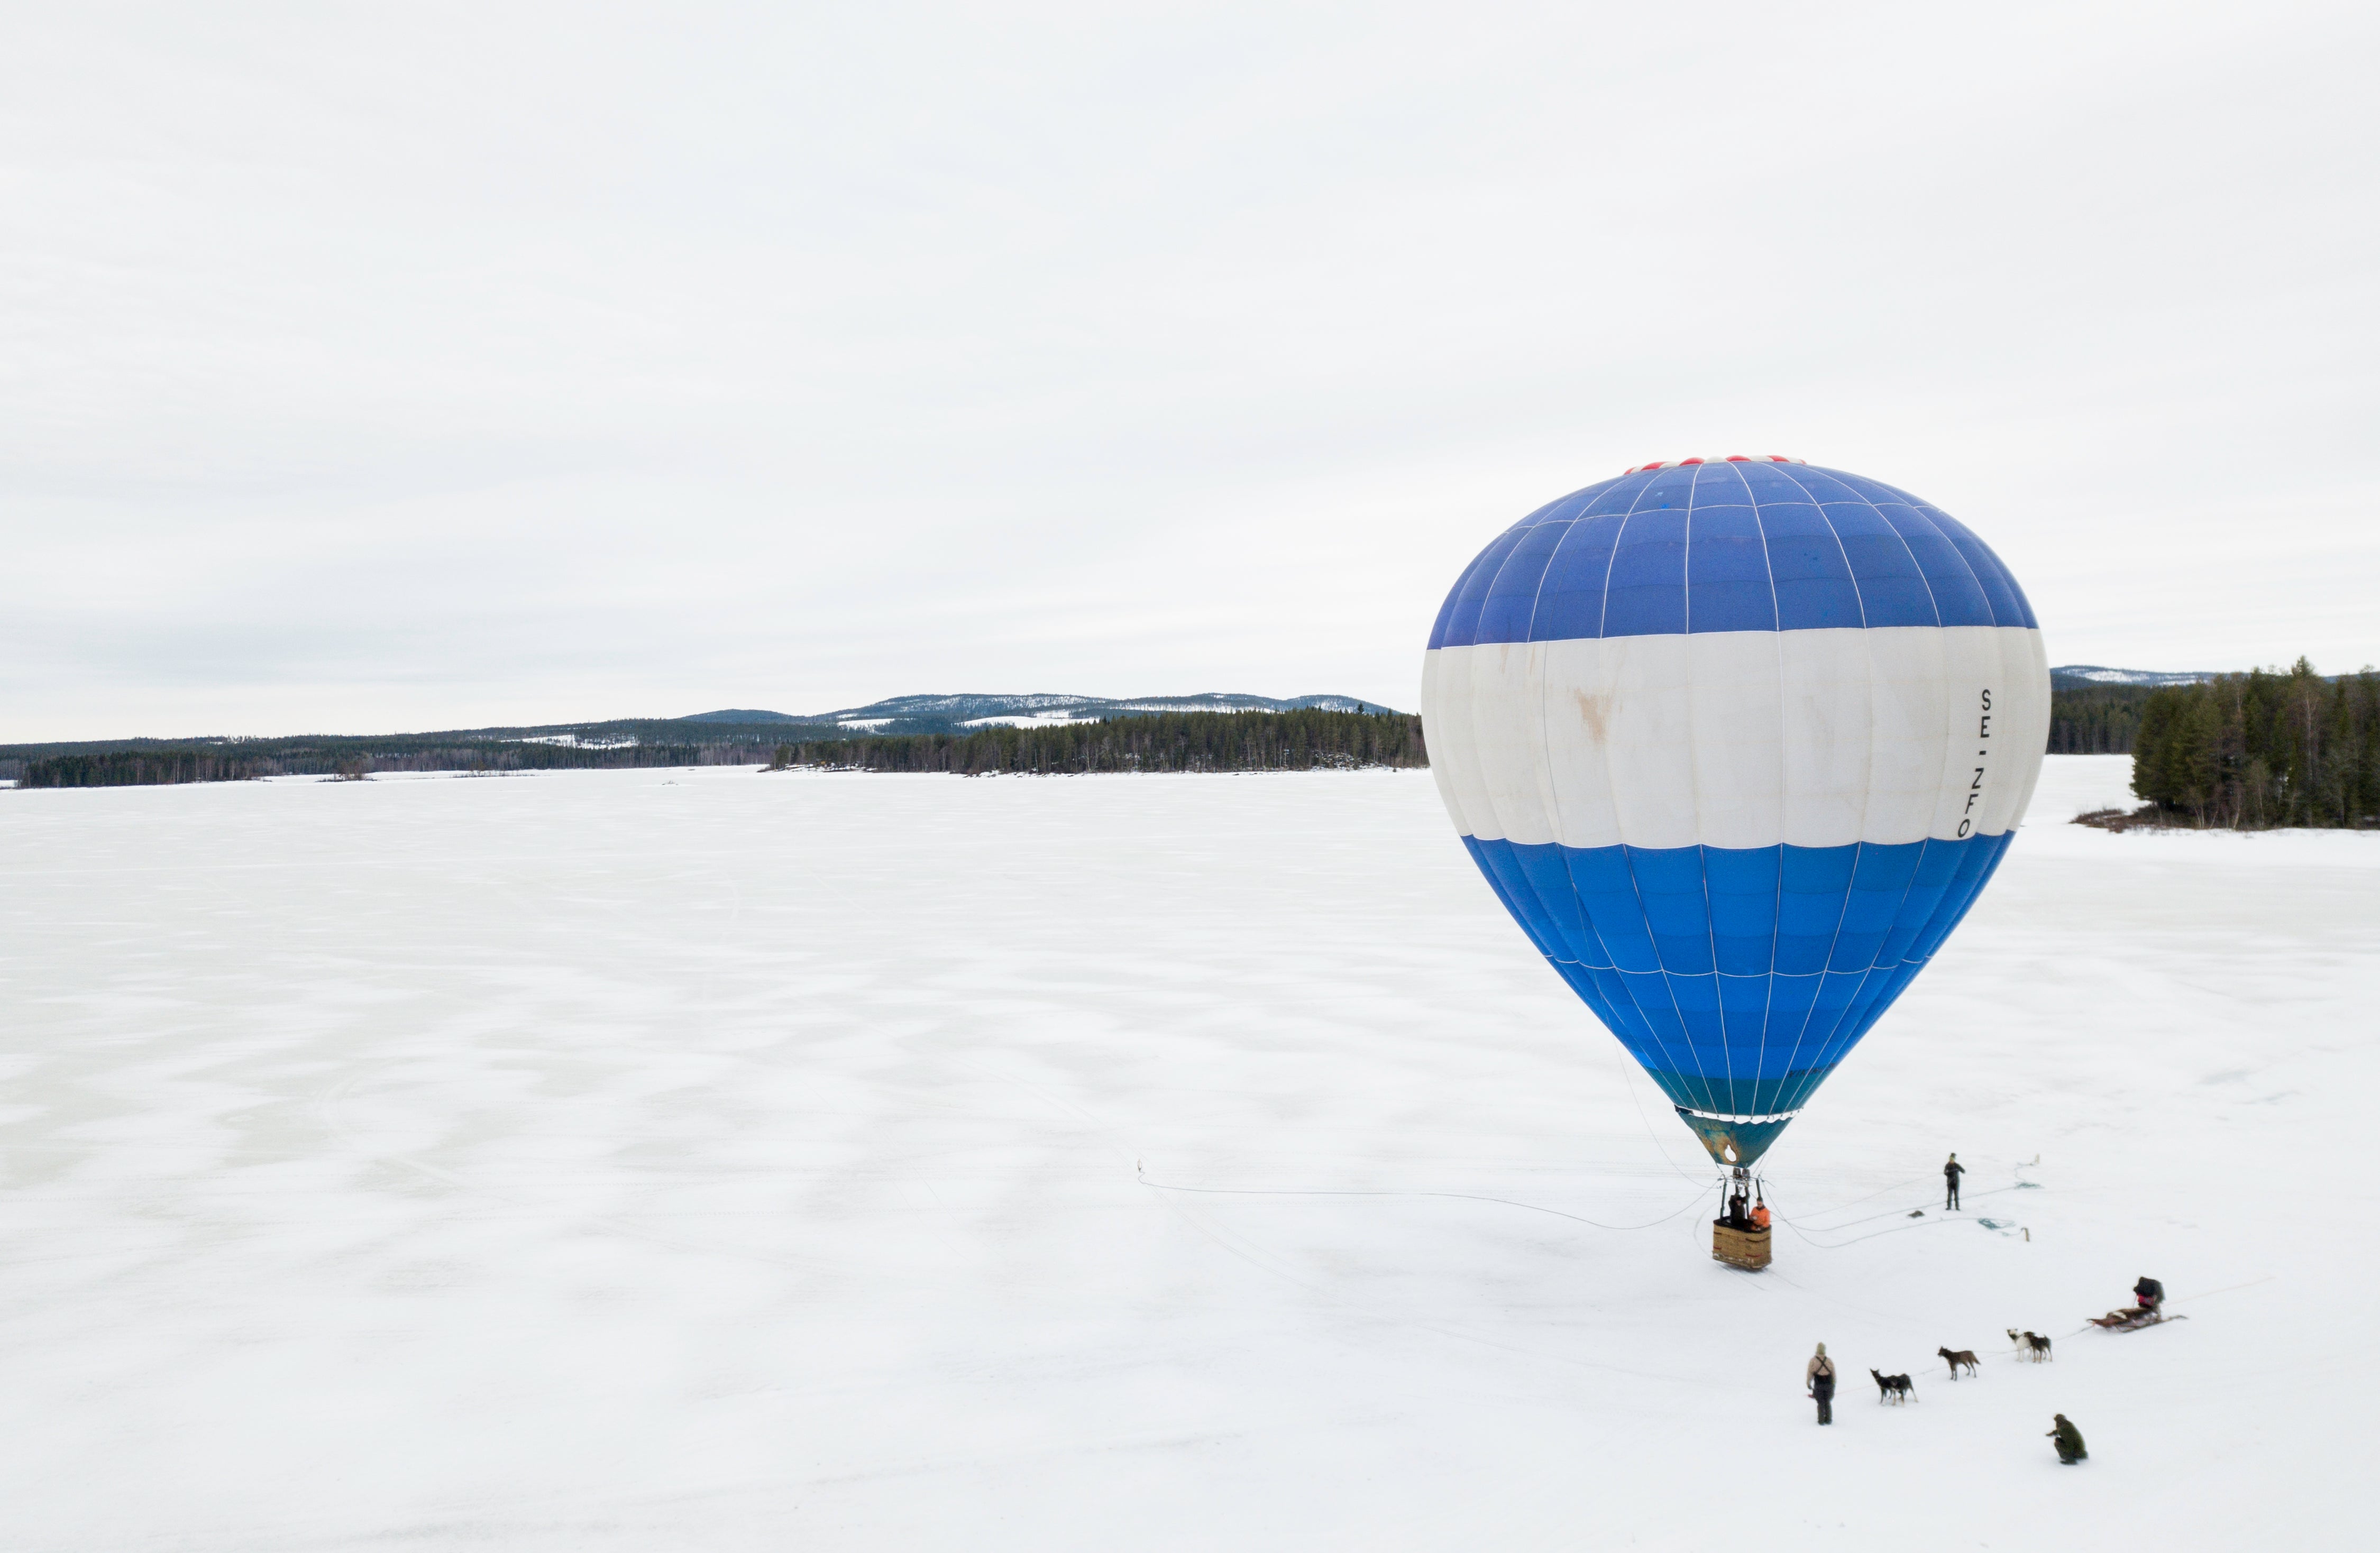 Balloon rides in the Arctic (DTW/PA)